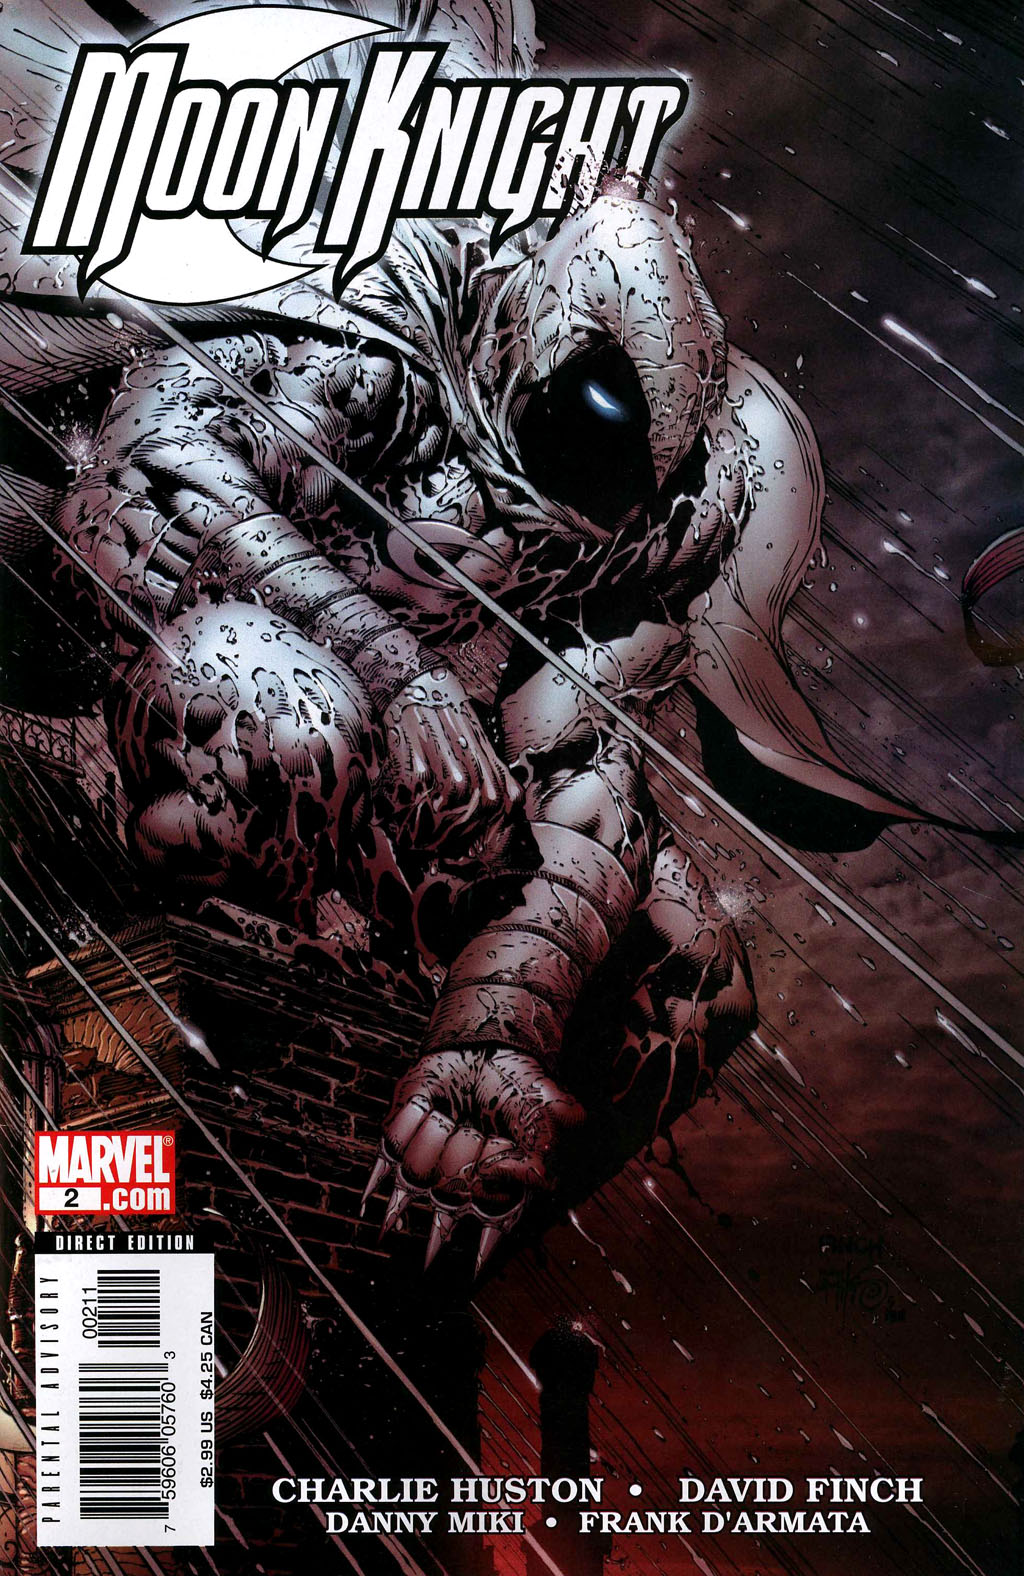  Moon Knight #2 - The Bottom Chapter 2: Fear, More Than God